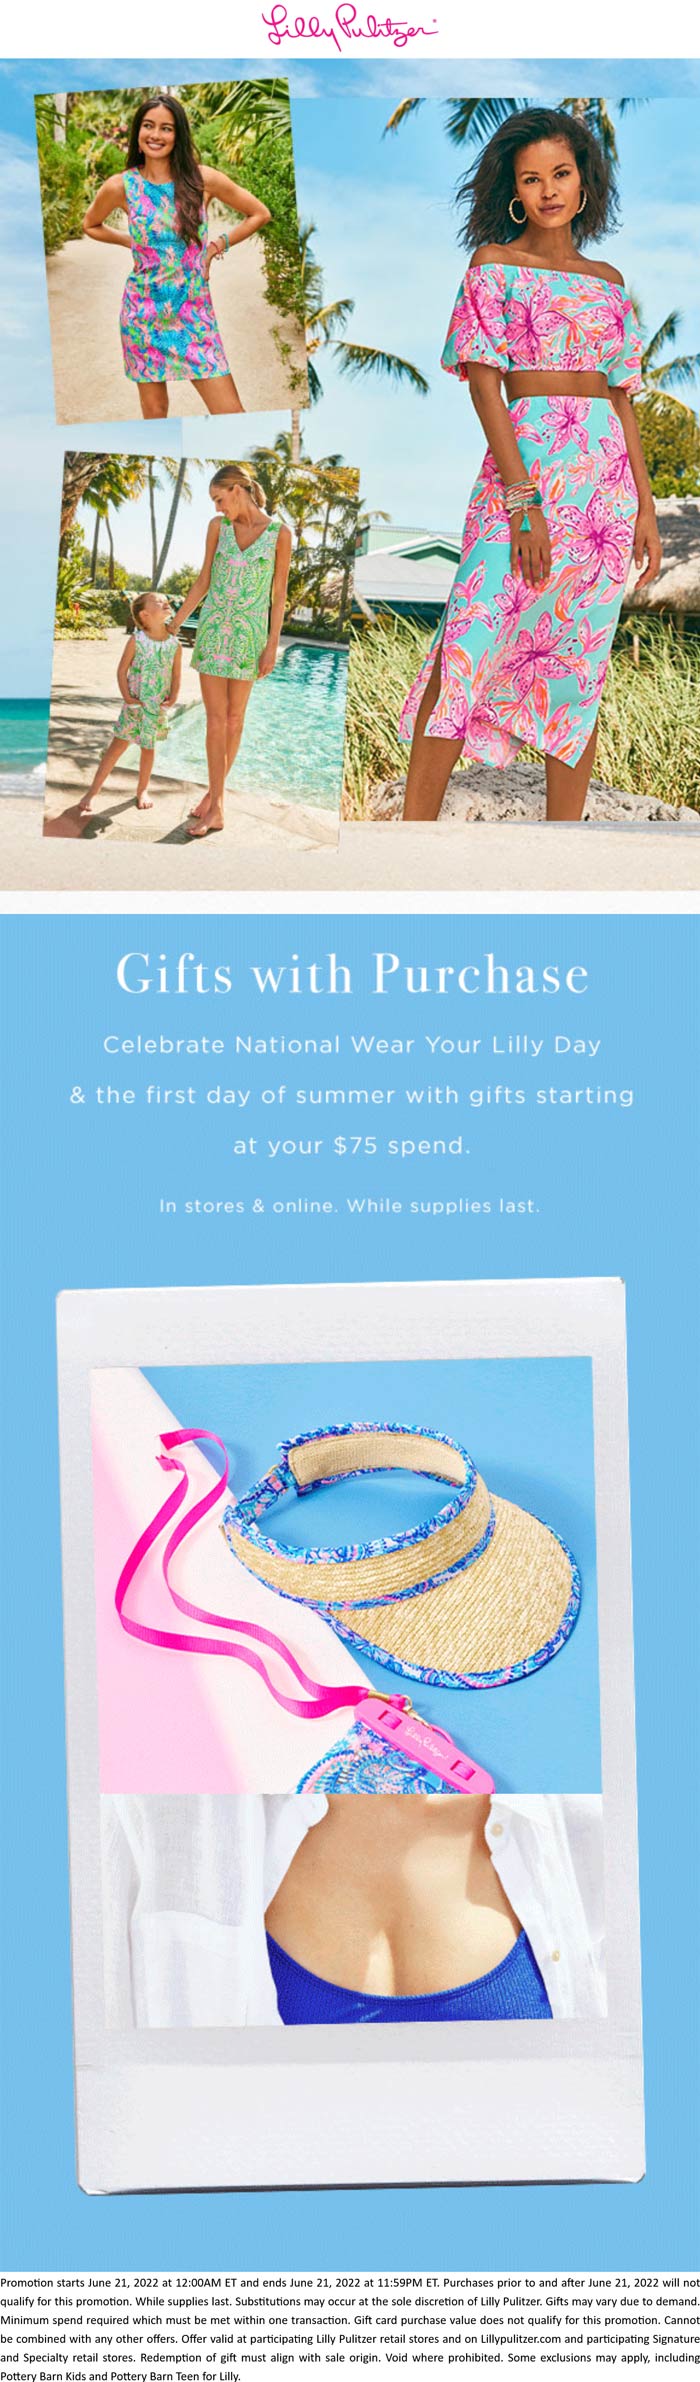 Lilly Pulitzer stores Coupon  Various gifts free on $75+ today at Lilly Pulitzer, ditto online #lillypulitzer 